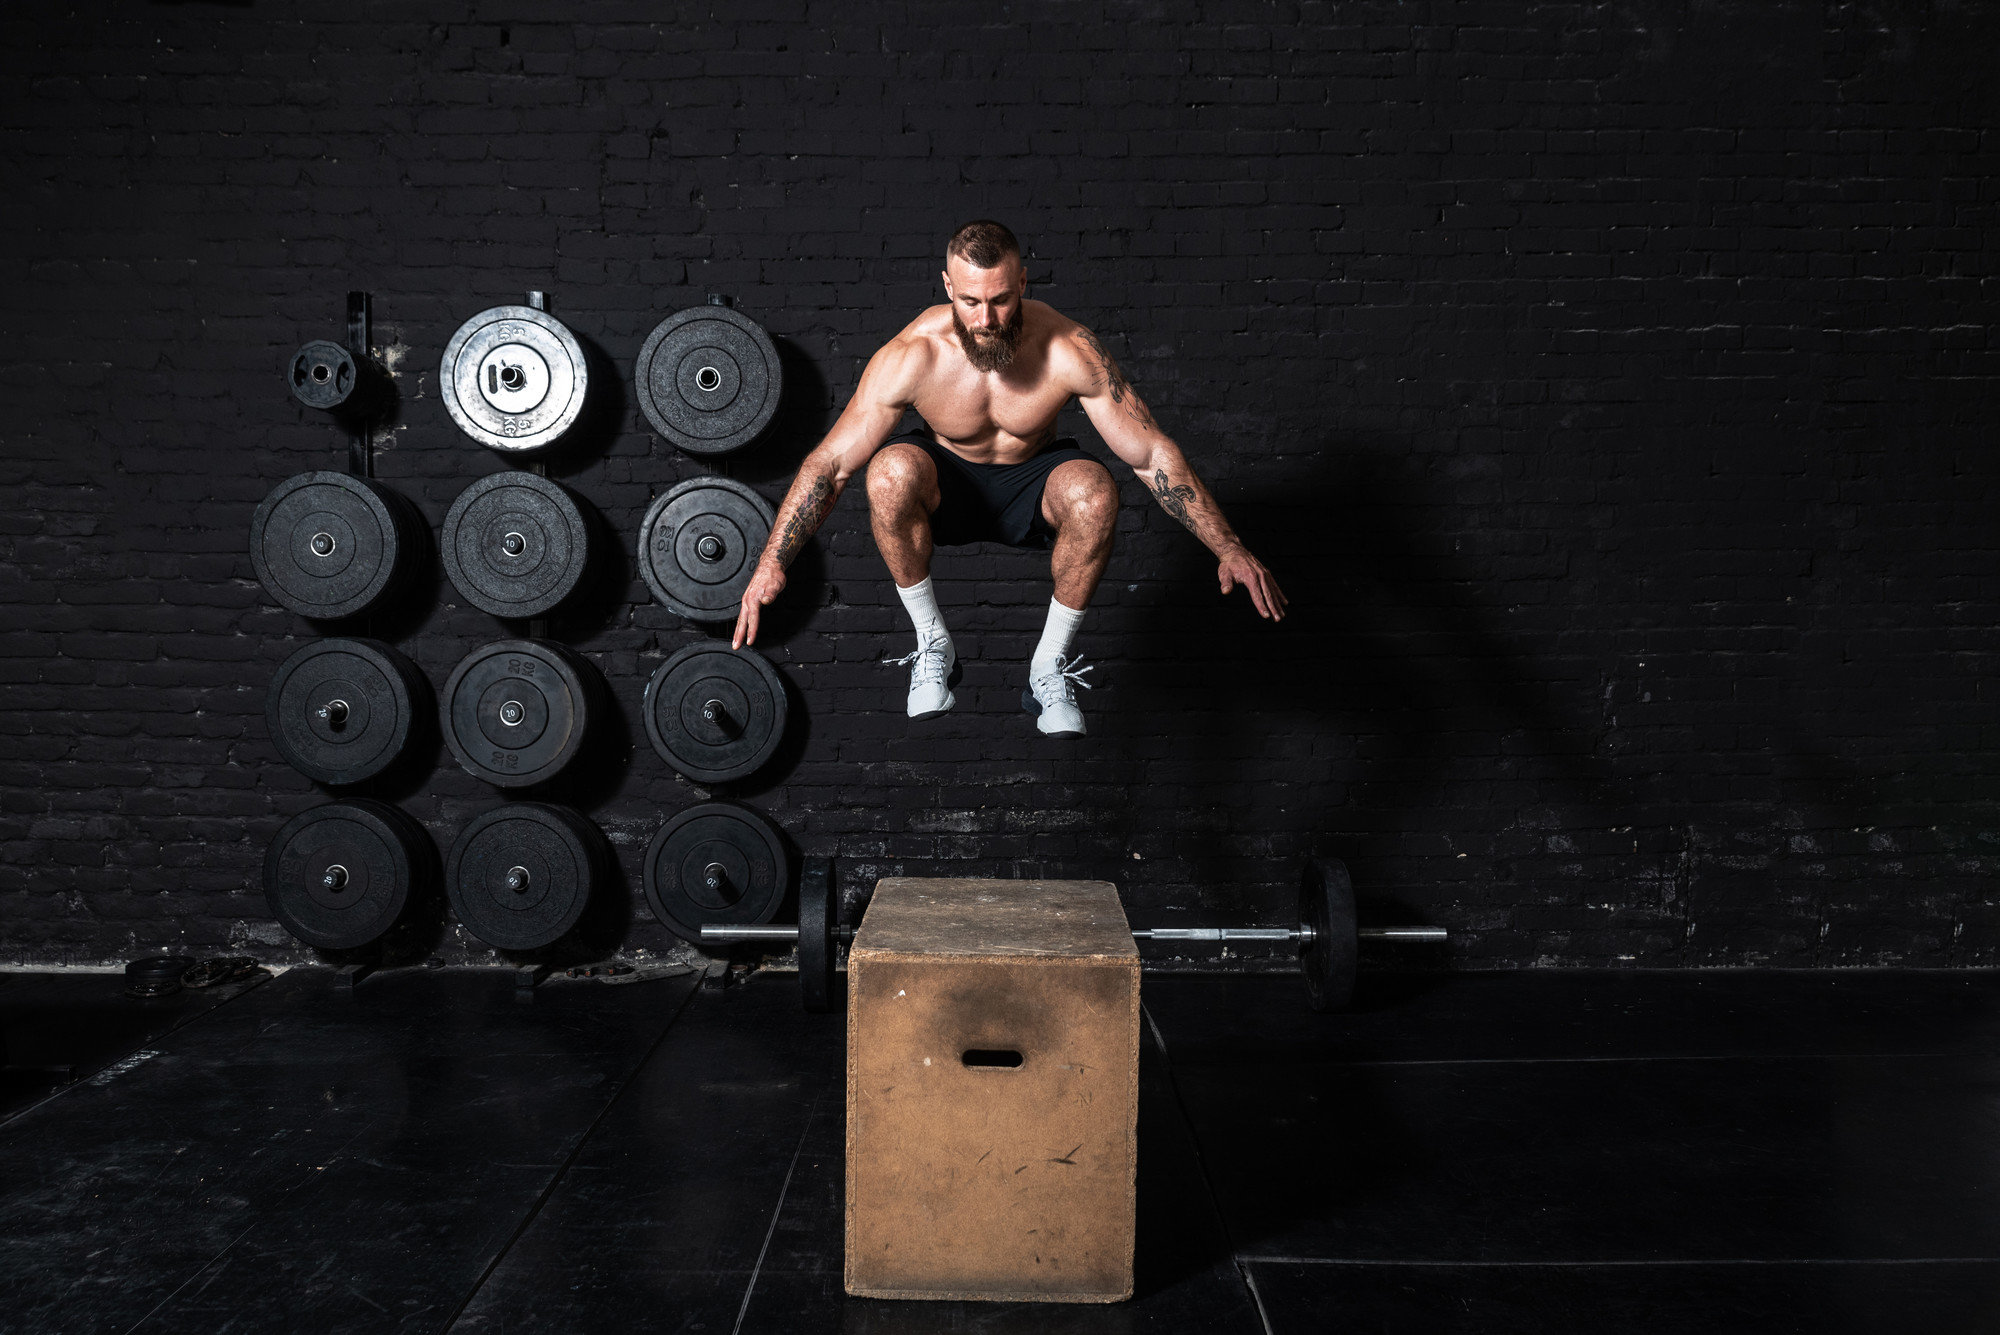 Plyometric exercises are a type of training that involves explosive movements, such as jumping or hopping, to improve speed, power, and agility. These exercises typically involve rapid stretching and contracting of muscles to generate maximum force in a s